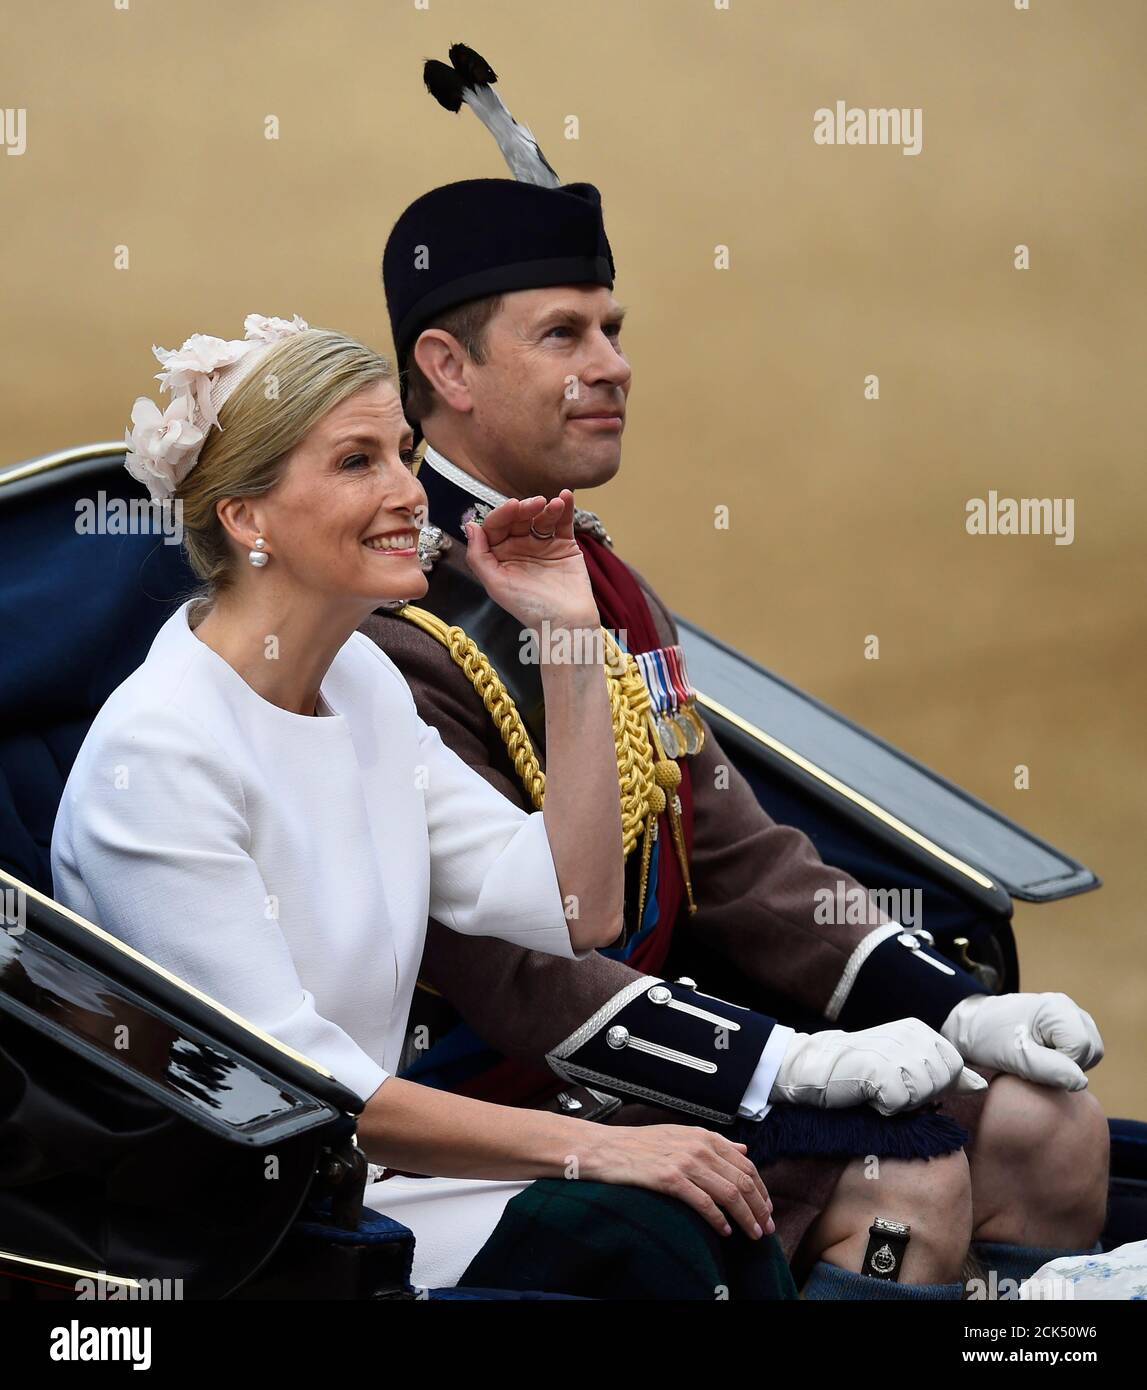 britains-sophie-countess-of-wessex-l-and-prince-edward-arrive-at-horseguards-parade-for-the-annual-trooping-the-colour-ceremony-in-central-london-britain-june-11-2016-trooping-the-colour-is-a-ceremony-to-honour-queen-elizabeths-official-birthday-the-queen-celebrates-her-90th-birthday-this-year-reutersdylan-martinez-2CK50W6.jpg